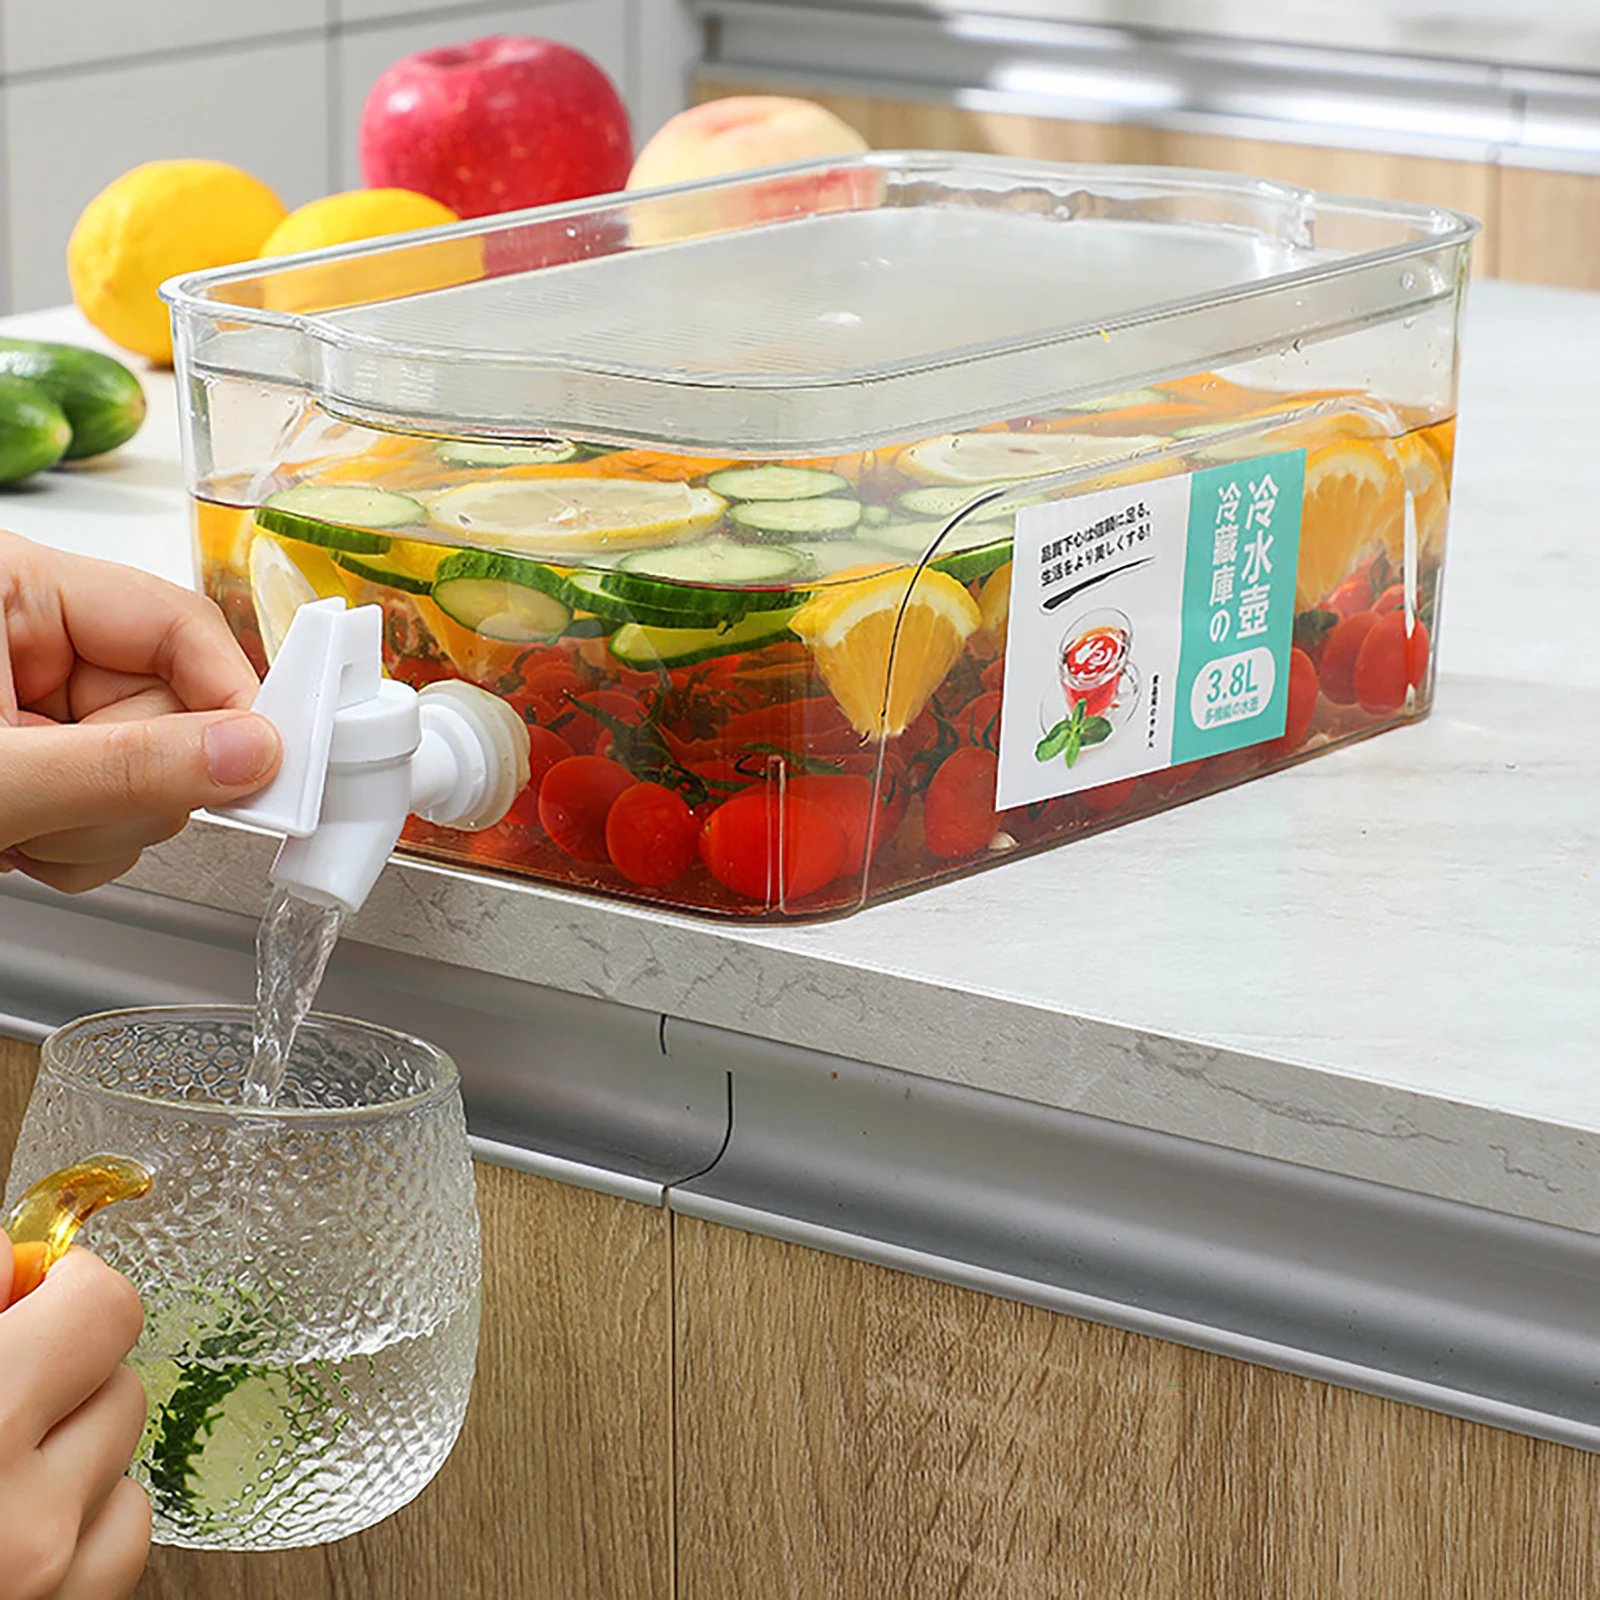 

Beverage Dispenser 3.8L Plastic Transparent Water Drink Pitcher Box with Faucet Storage Tray Leak Proof Kettle